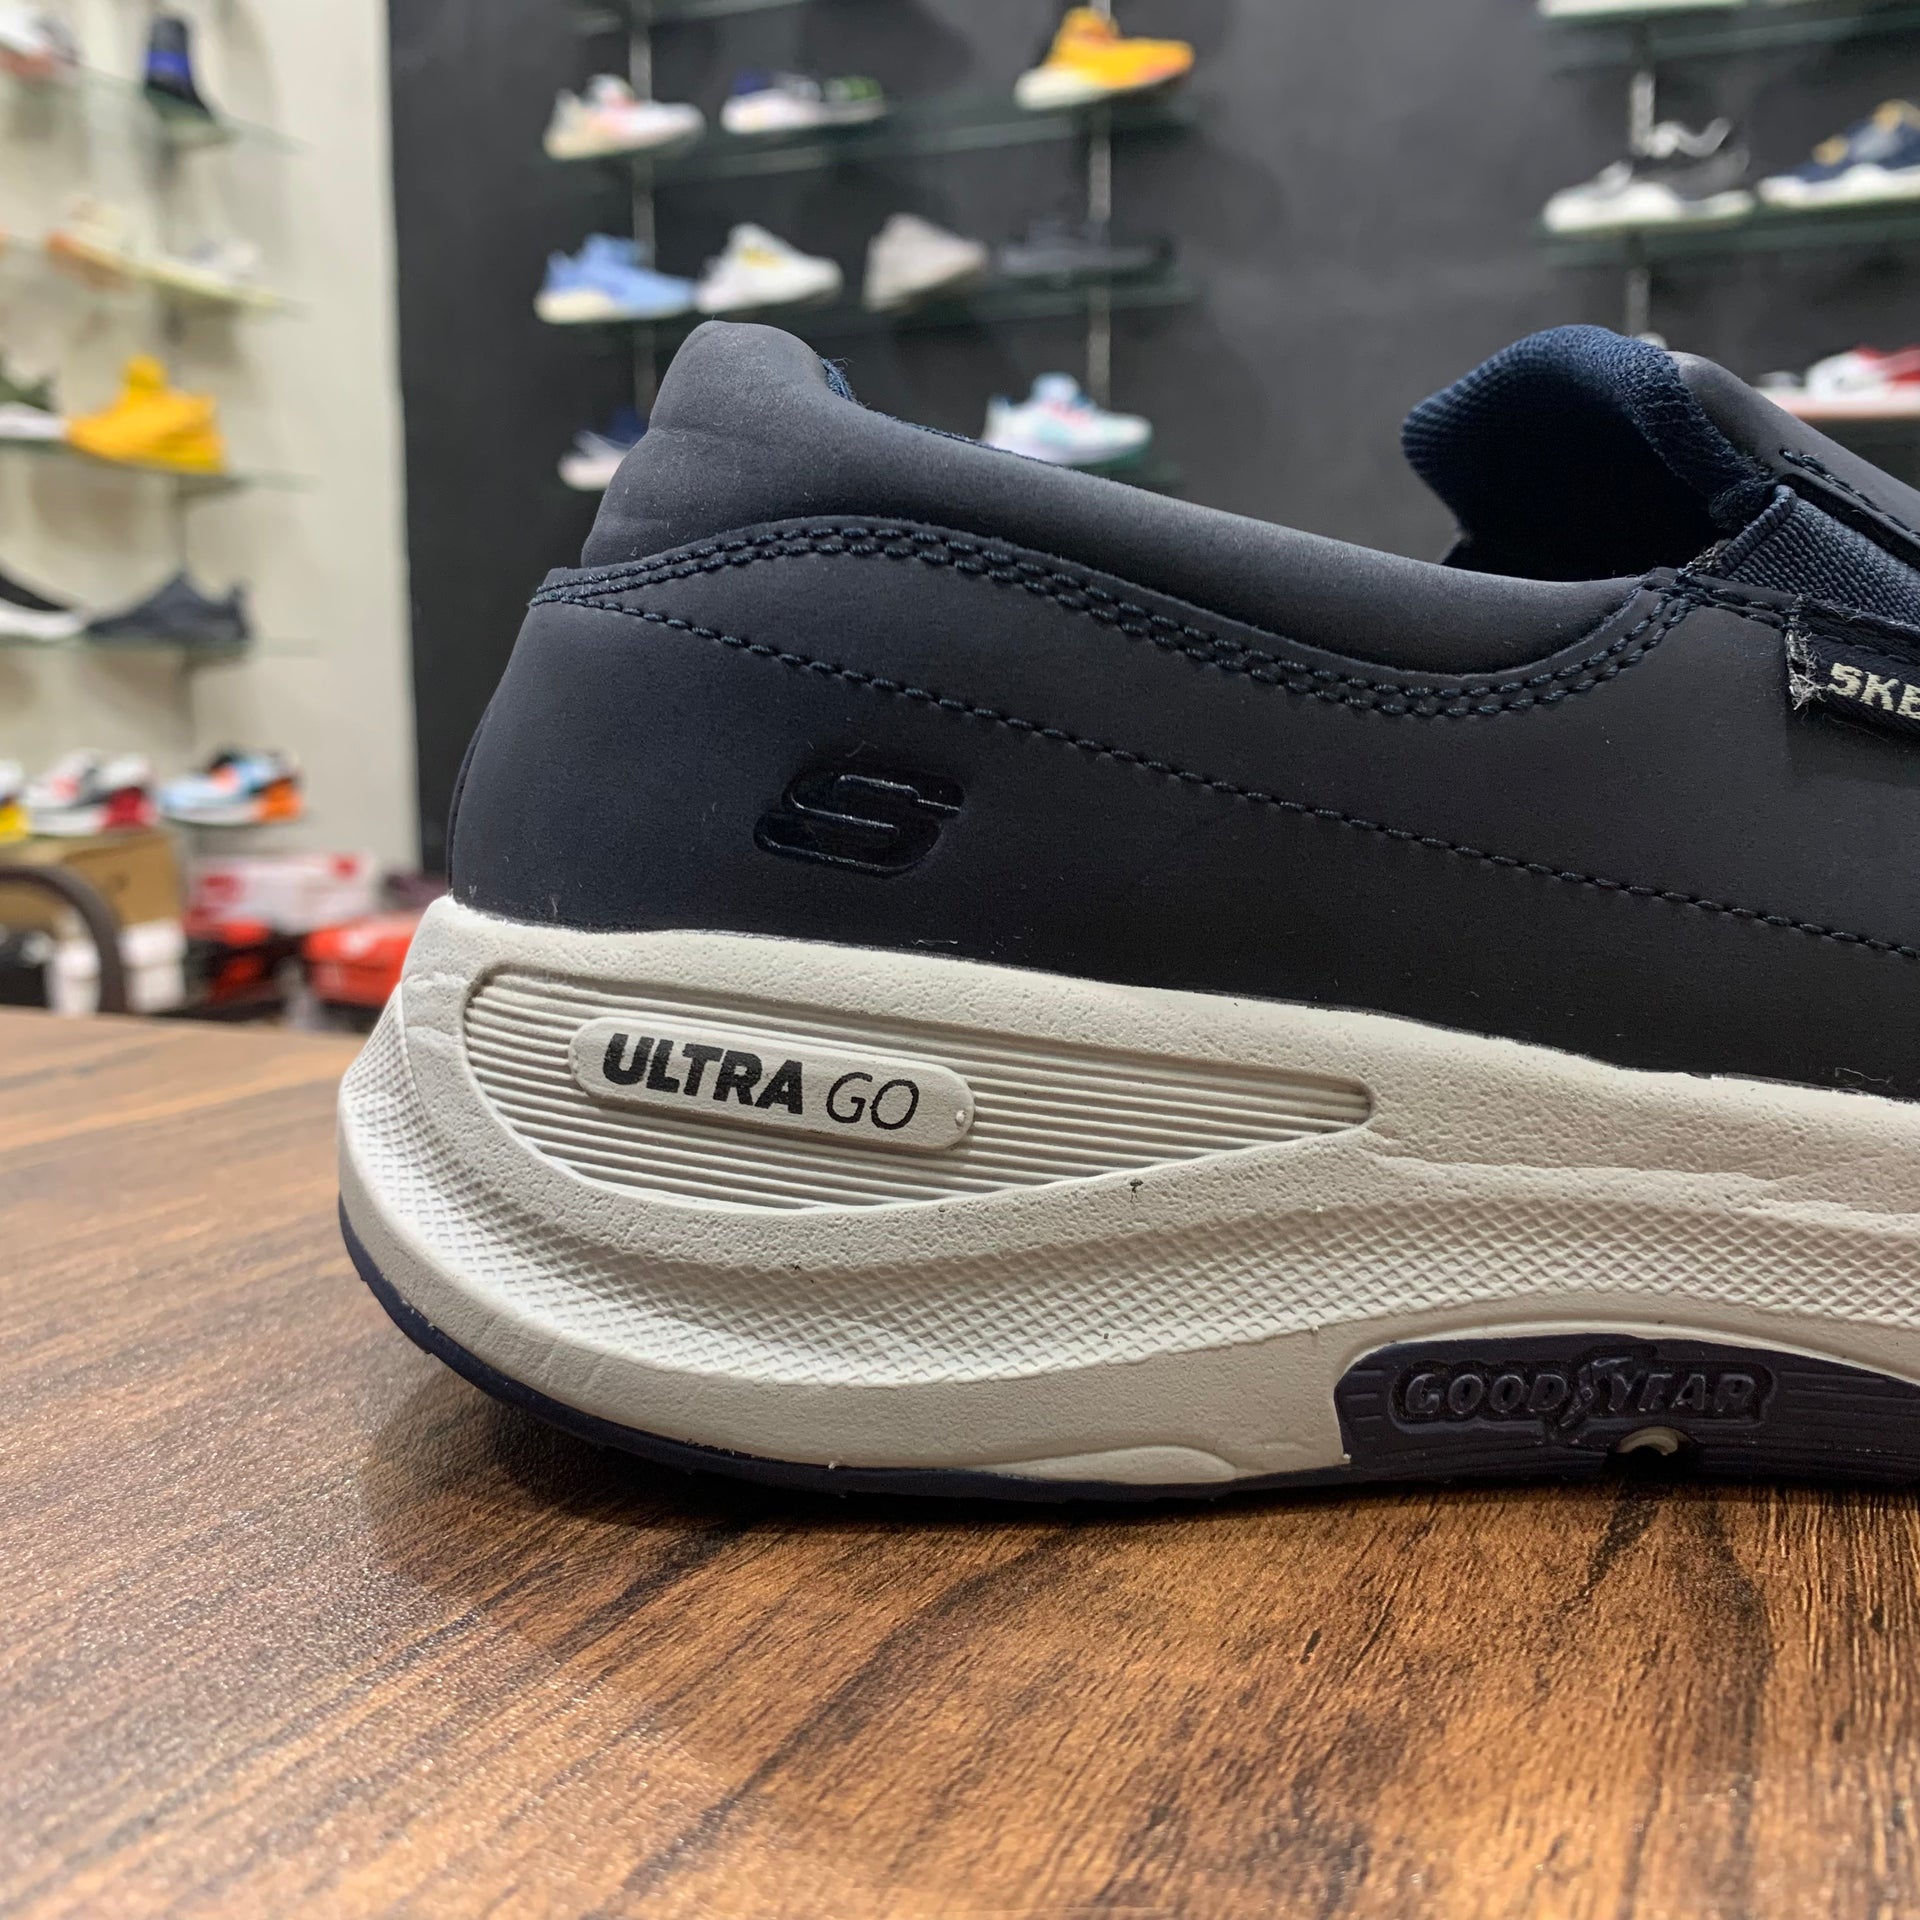 Sketcher Leather Ultra Go-Goodyear Sole 